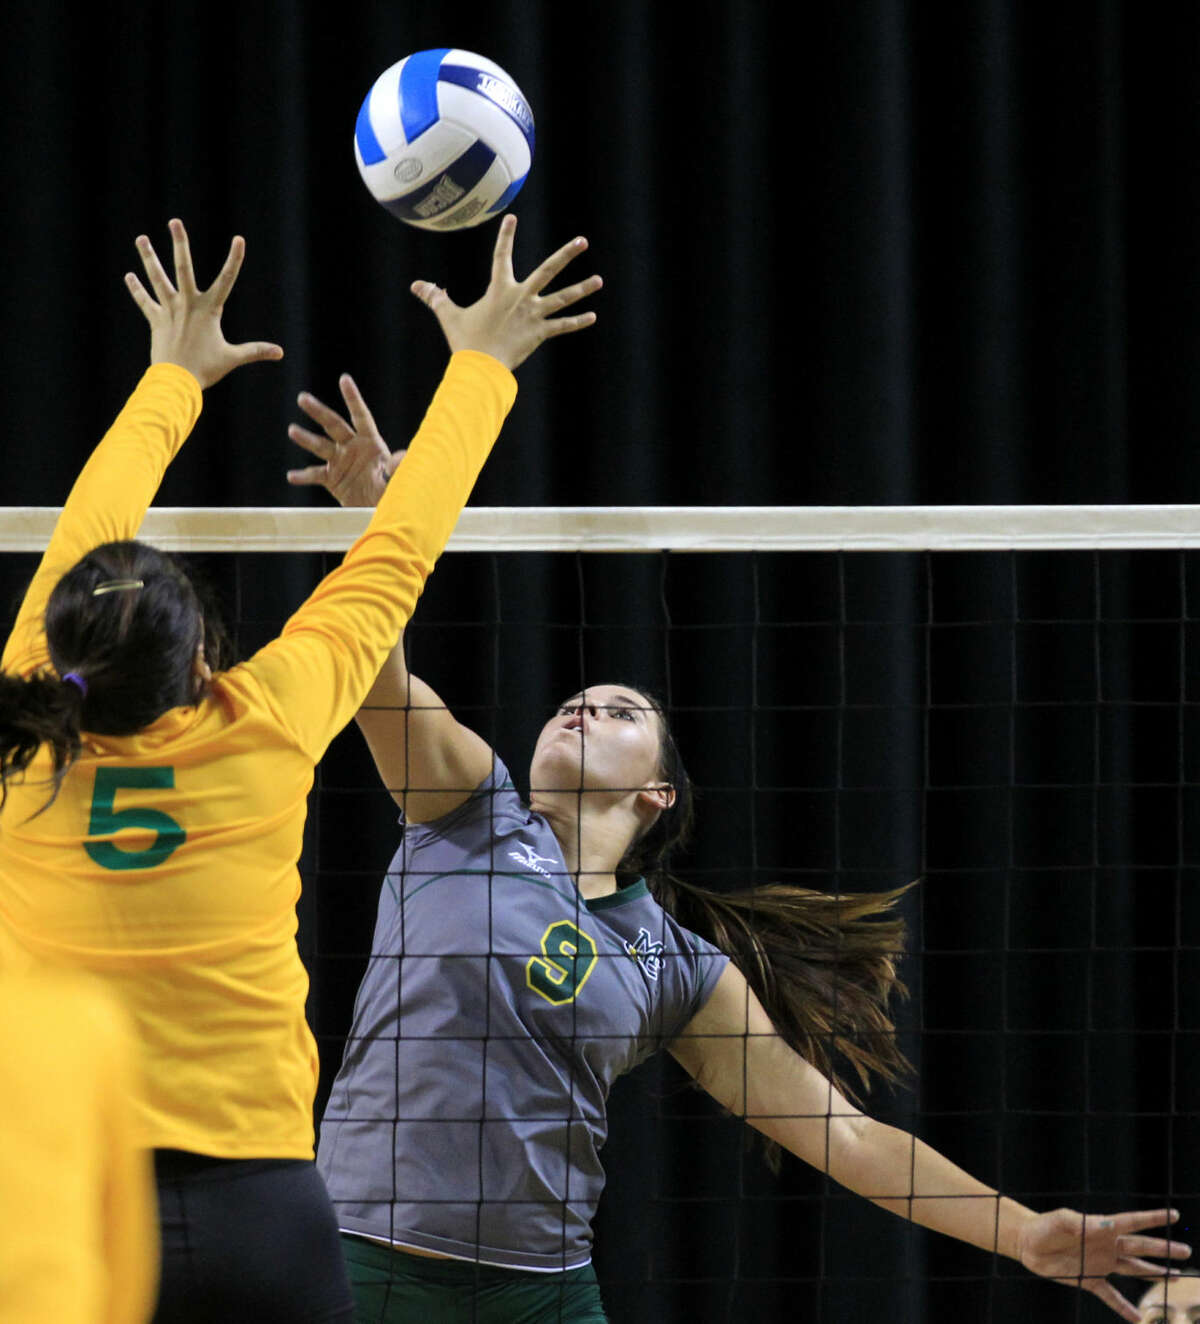 Midland College's Shelby Bartley (9) hits against Laredo's Stephanie Perez (5) on Saturday, Aug. 23, 2014 at Chaparral Center. James Durbin/Reporter-Telegram